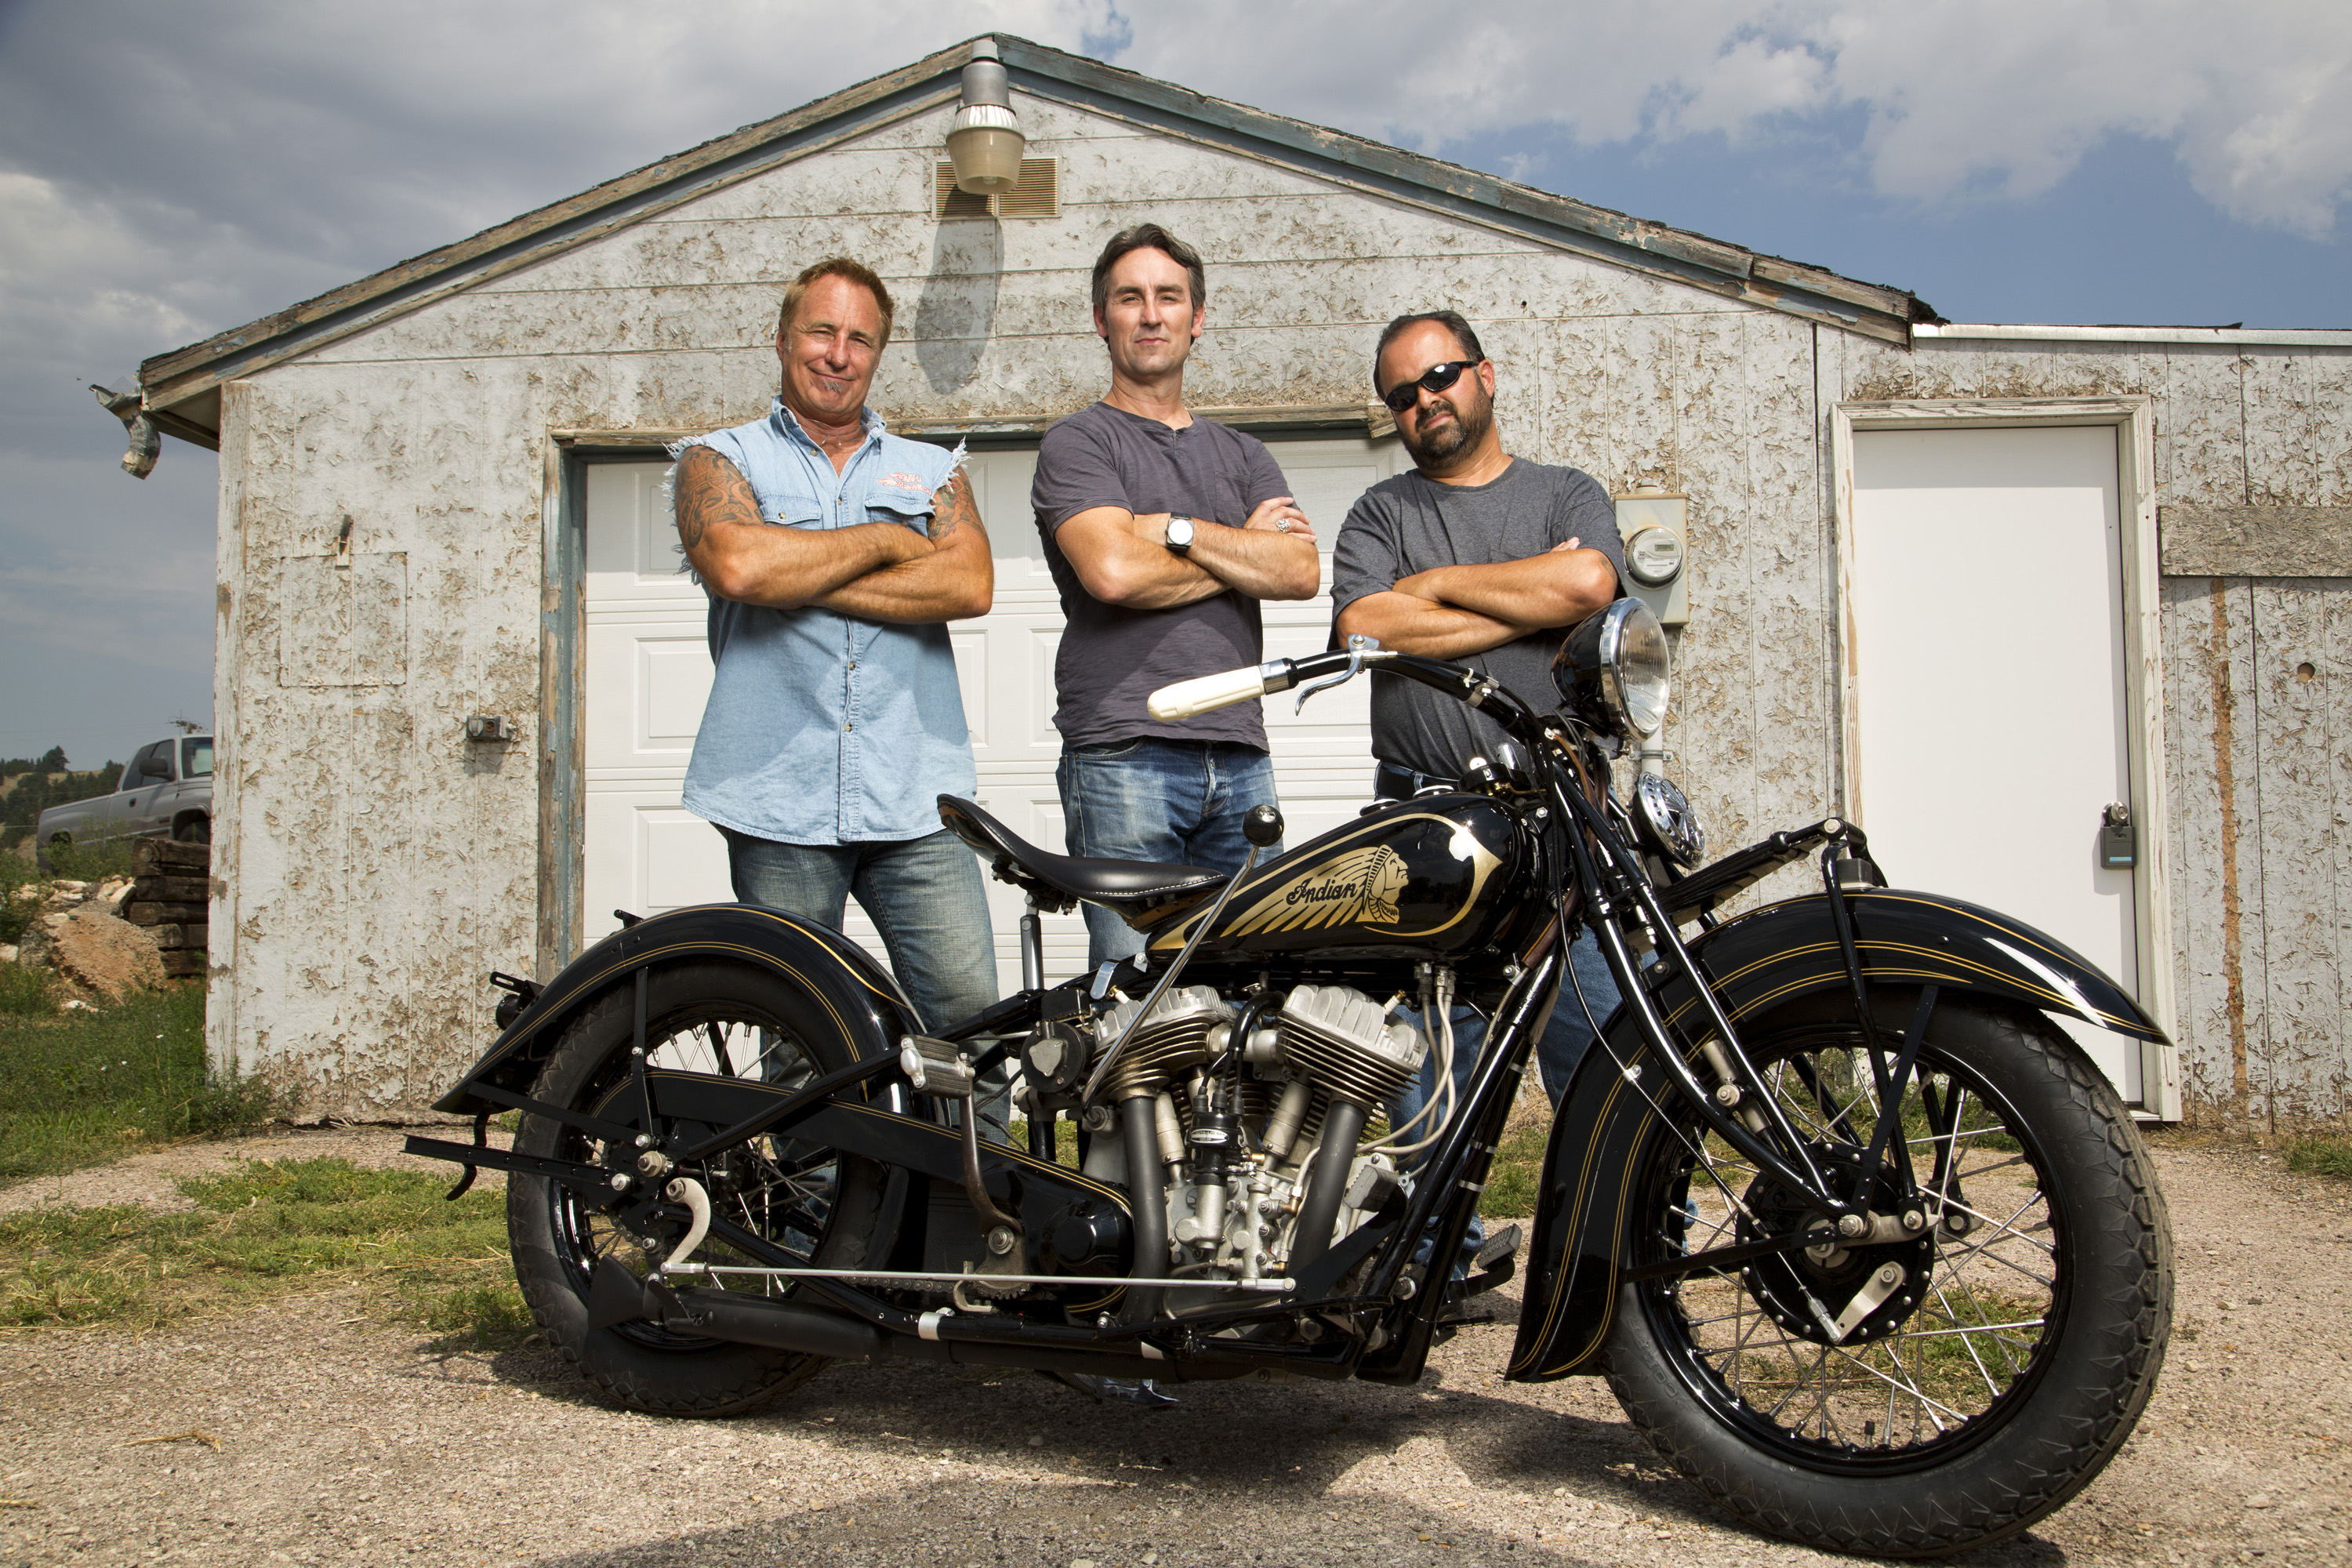 American Pickers #8